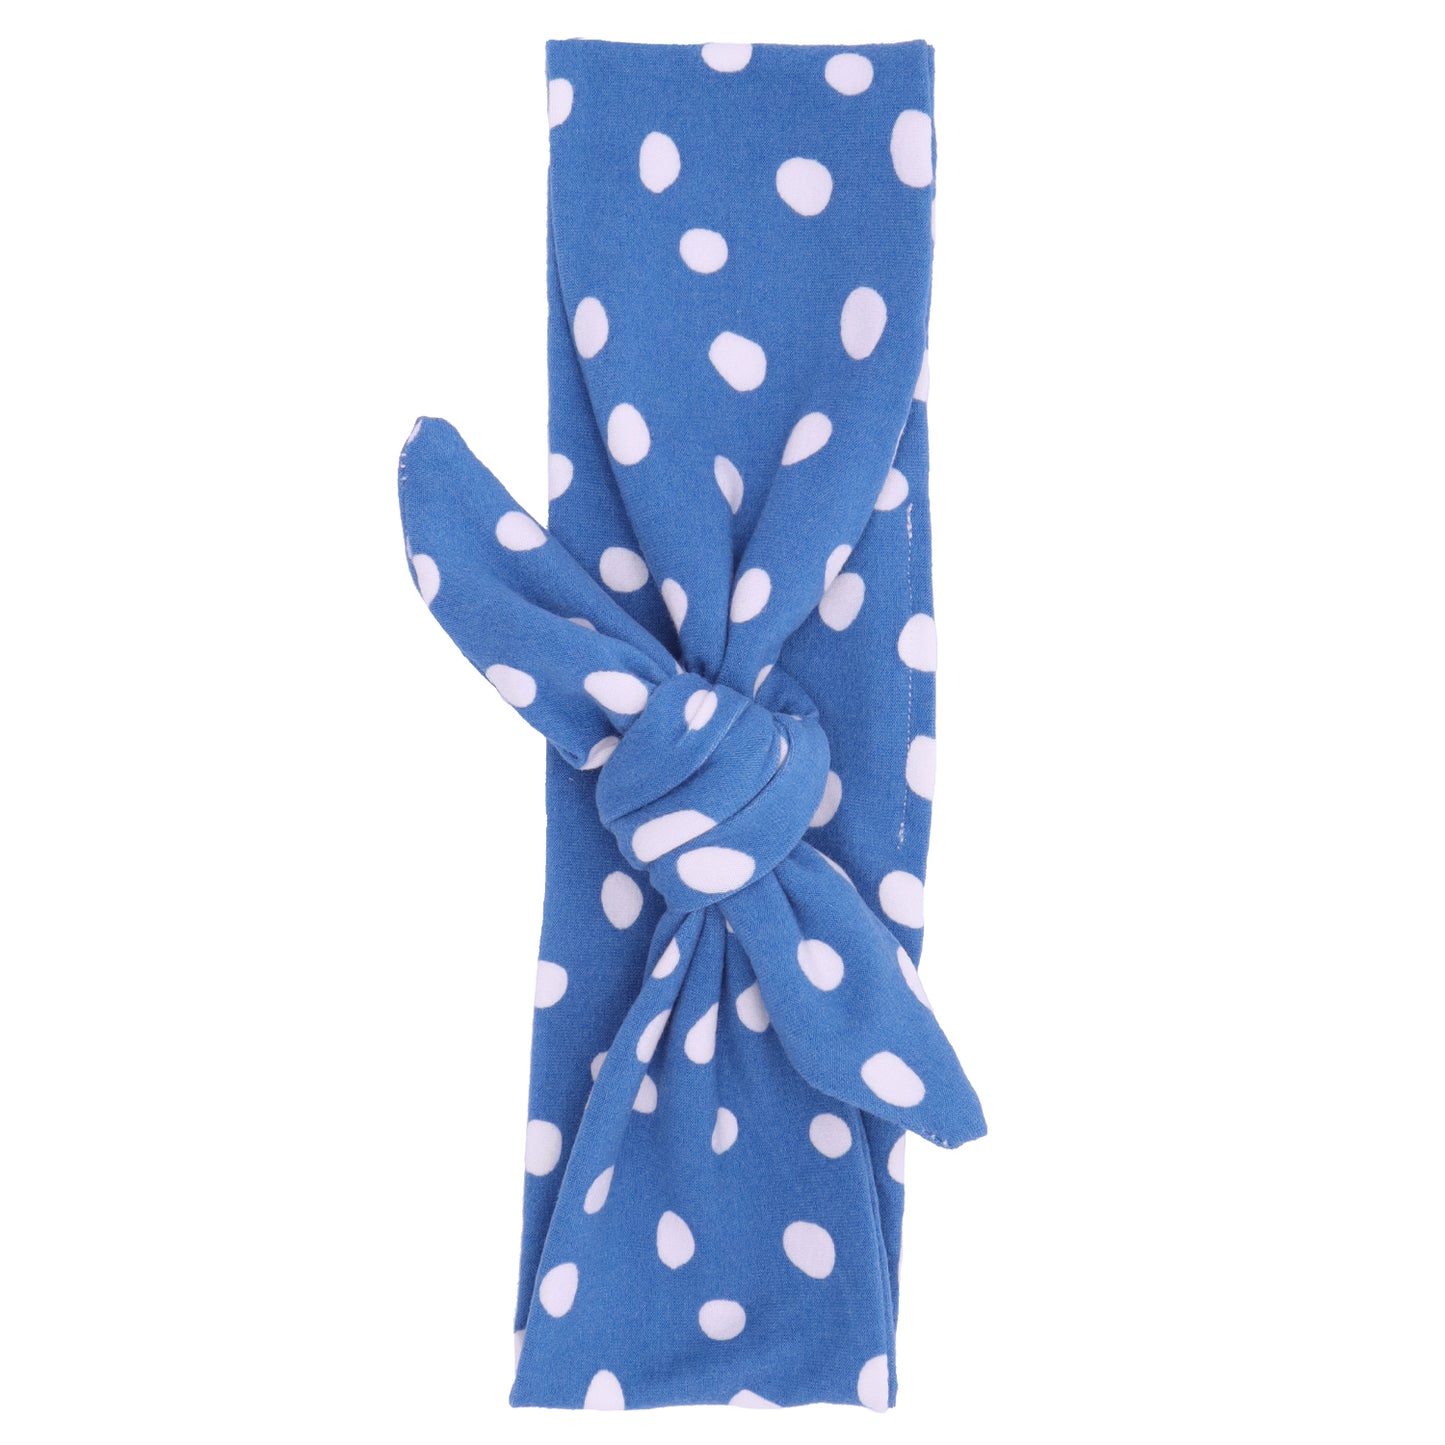 Tie - Blue & White Abstract Dot